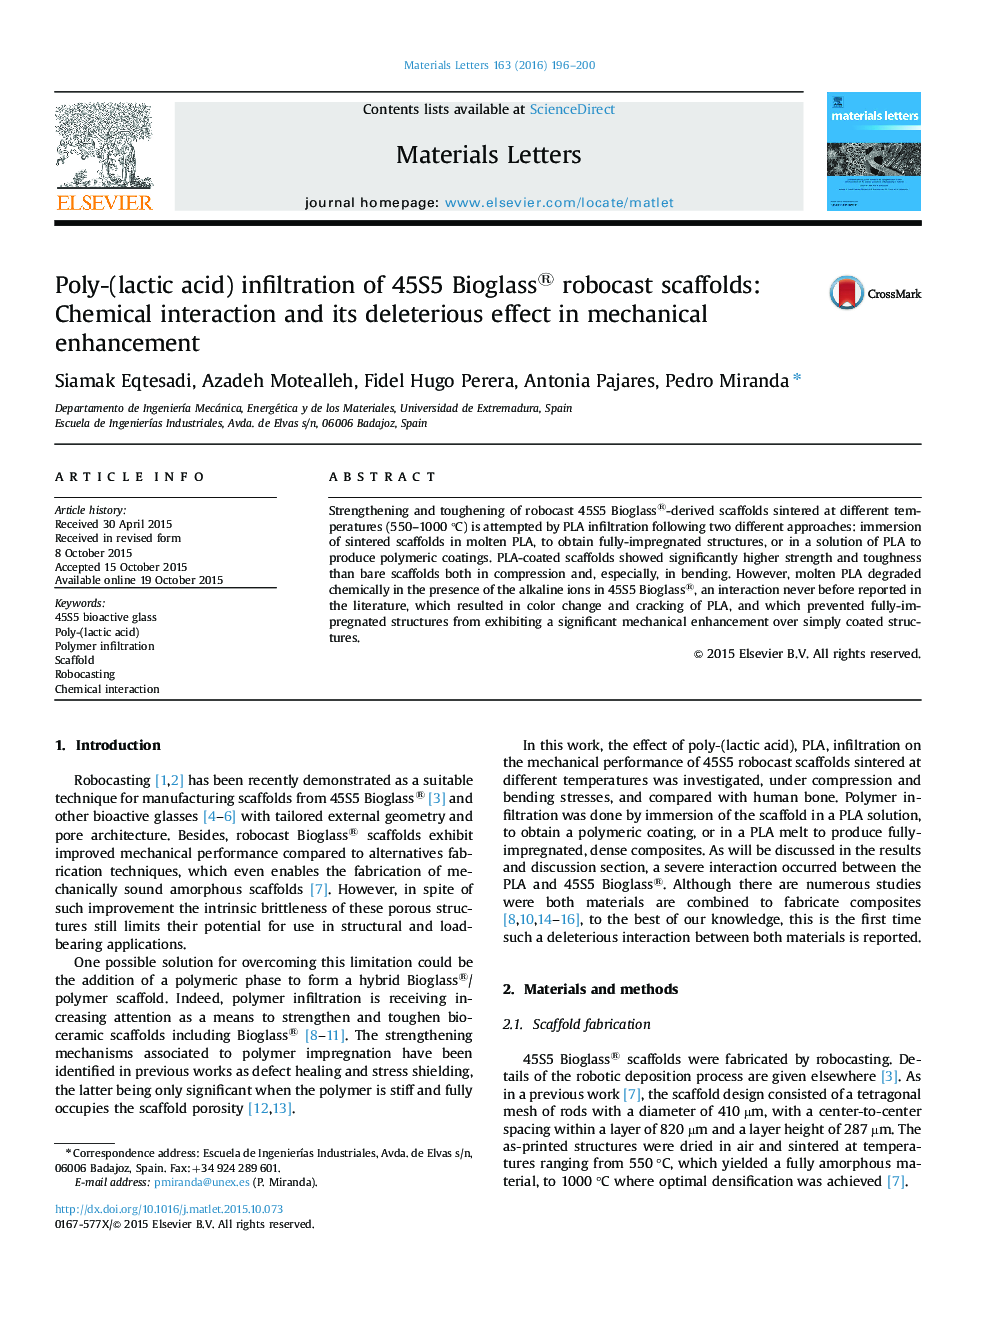 Poly-(lactic acid) infiltration of 45S5 Bioglass® robocast scaffolds: Chemical interaction and its deleterious effect in mechanical enhancement